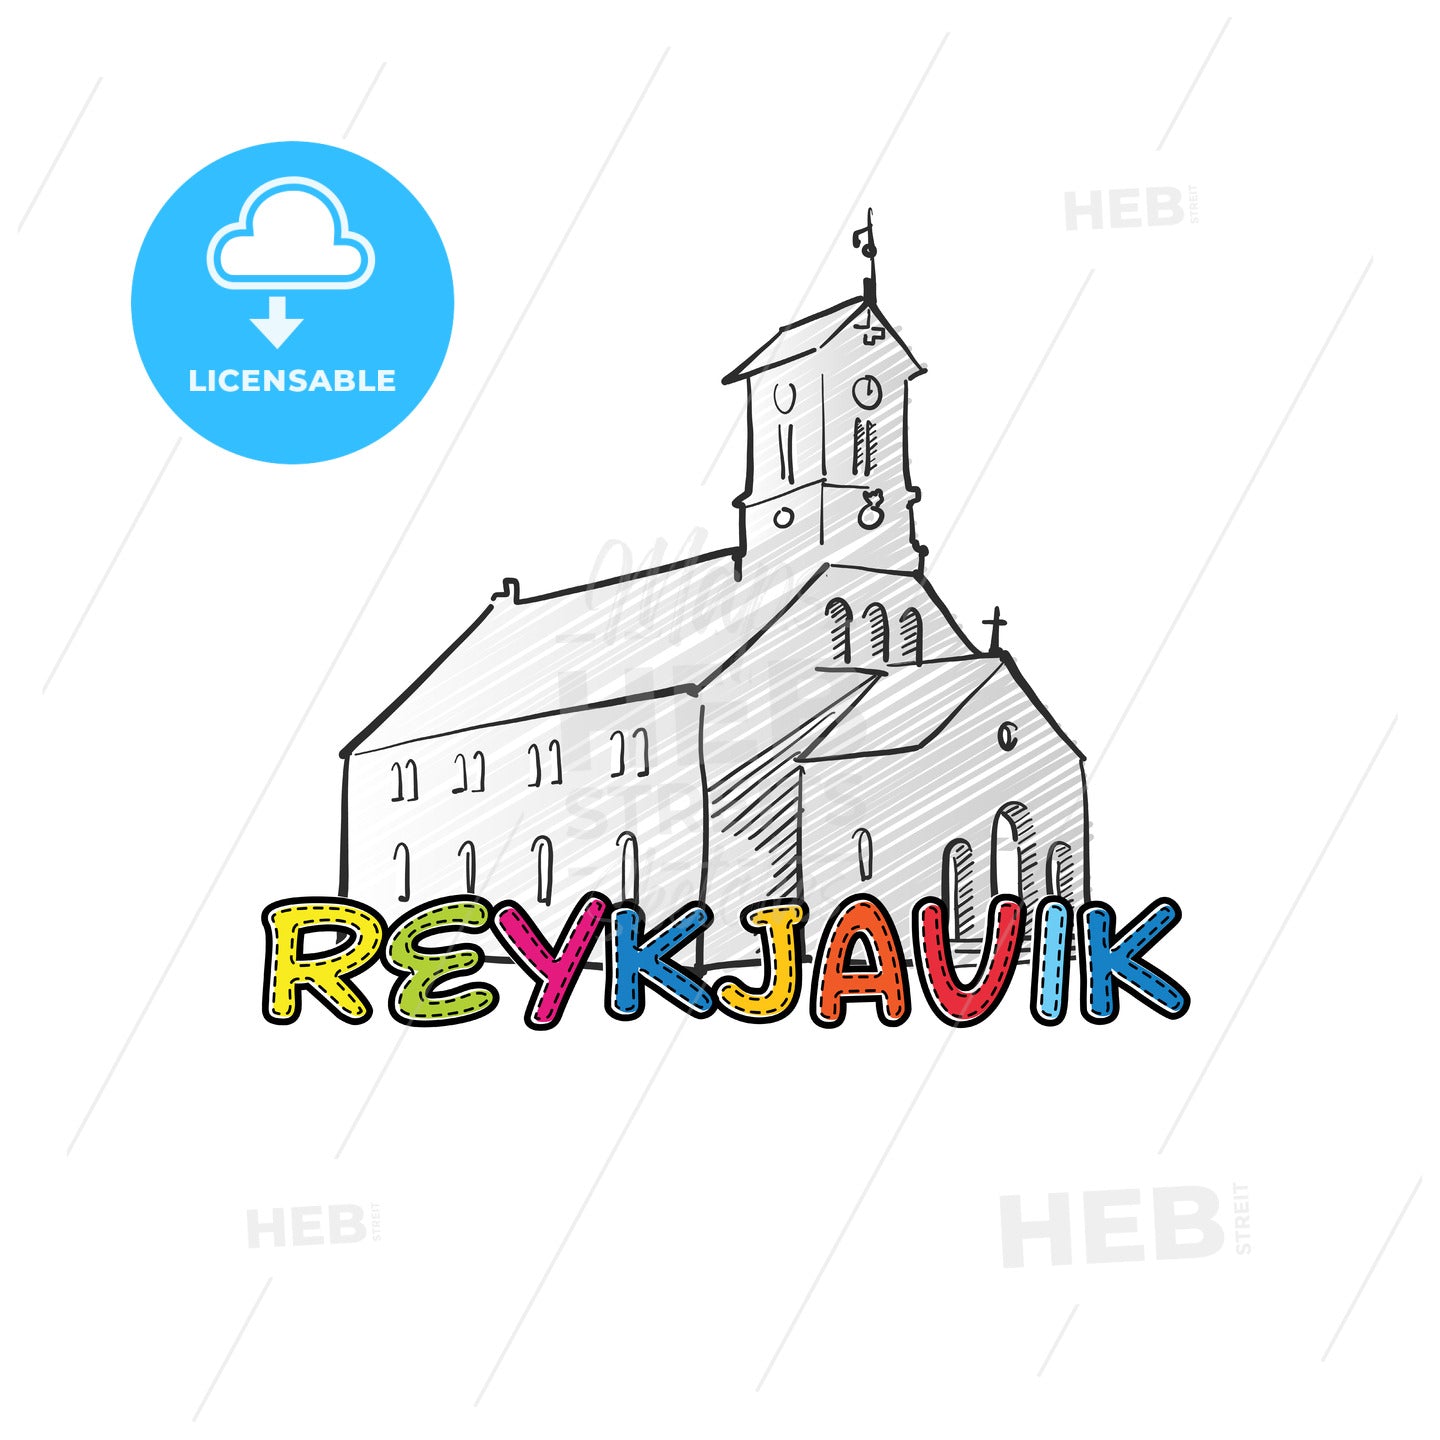 Reykjavik beautiful sketched icon – instant download